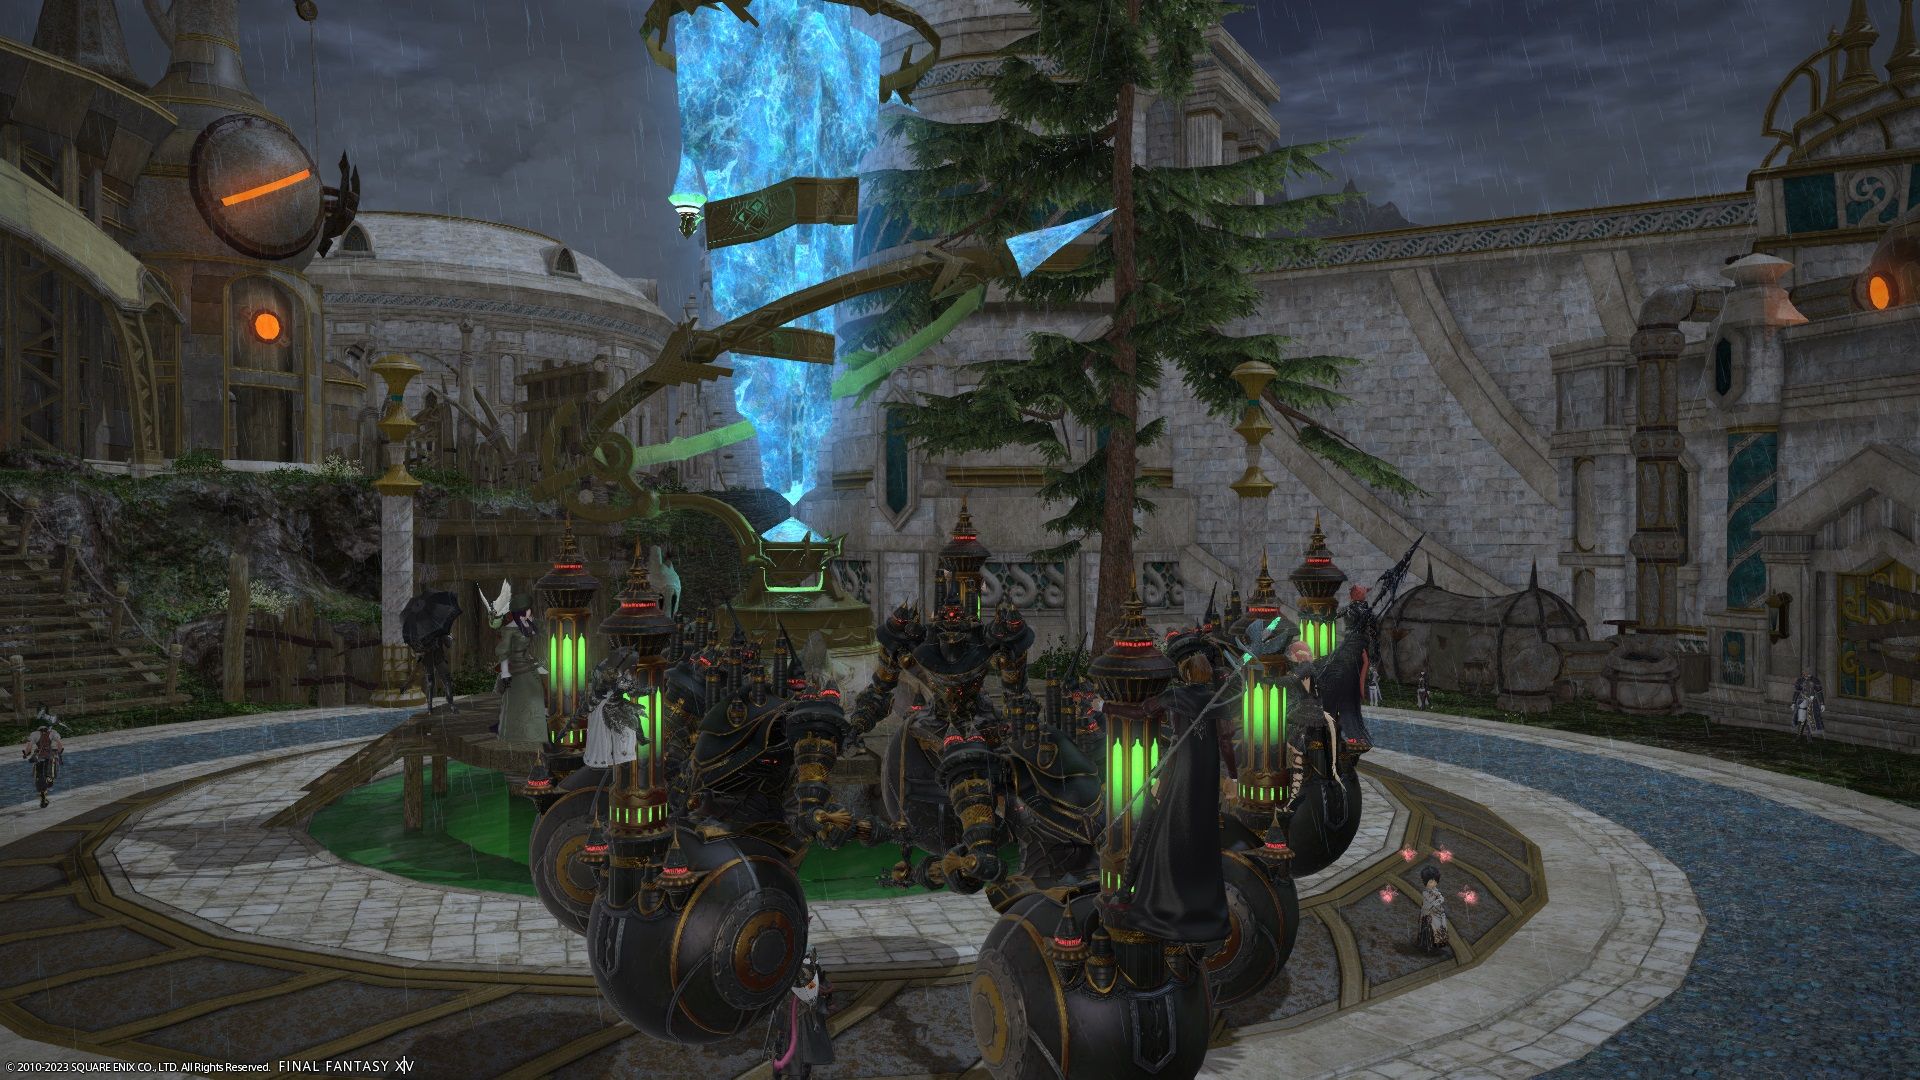 In Final Fantasy 14, several players gathered at Mount Arrhidaeus.